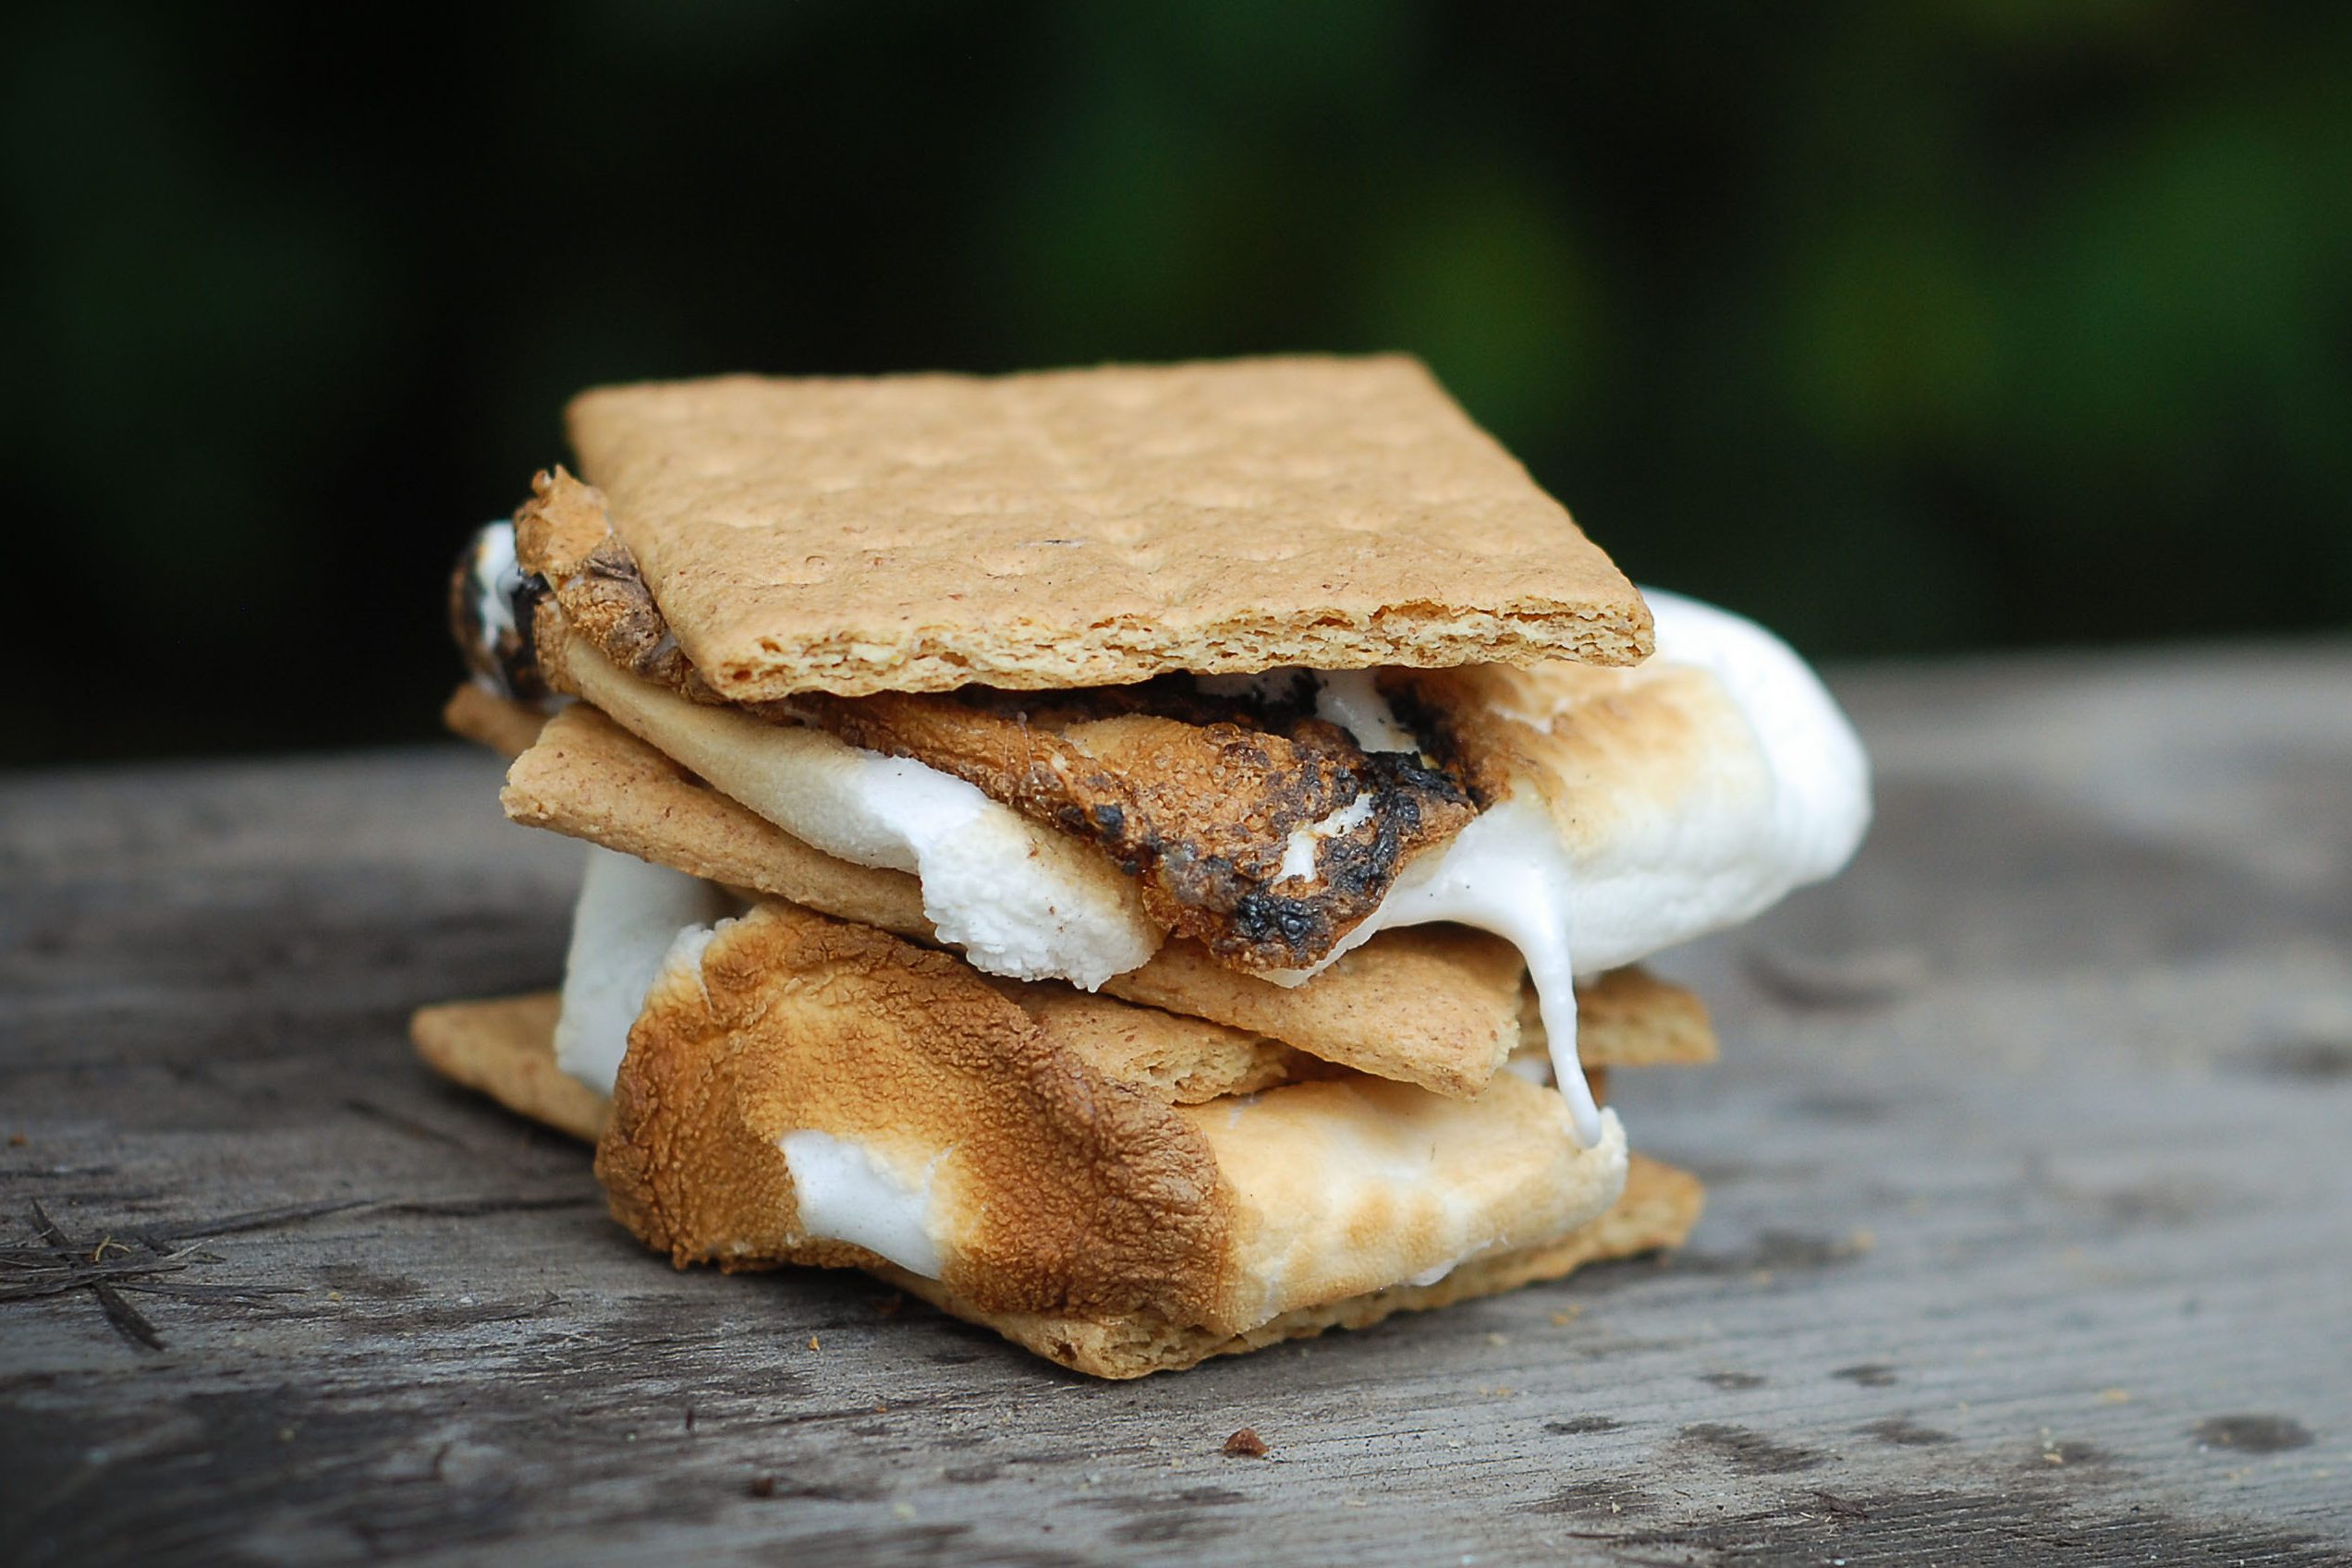 A crispy sticky double stacked smore cooked over an open fire at a summer bbq,